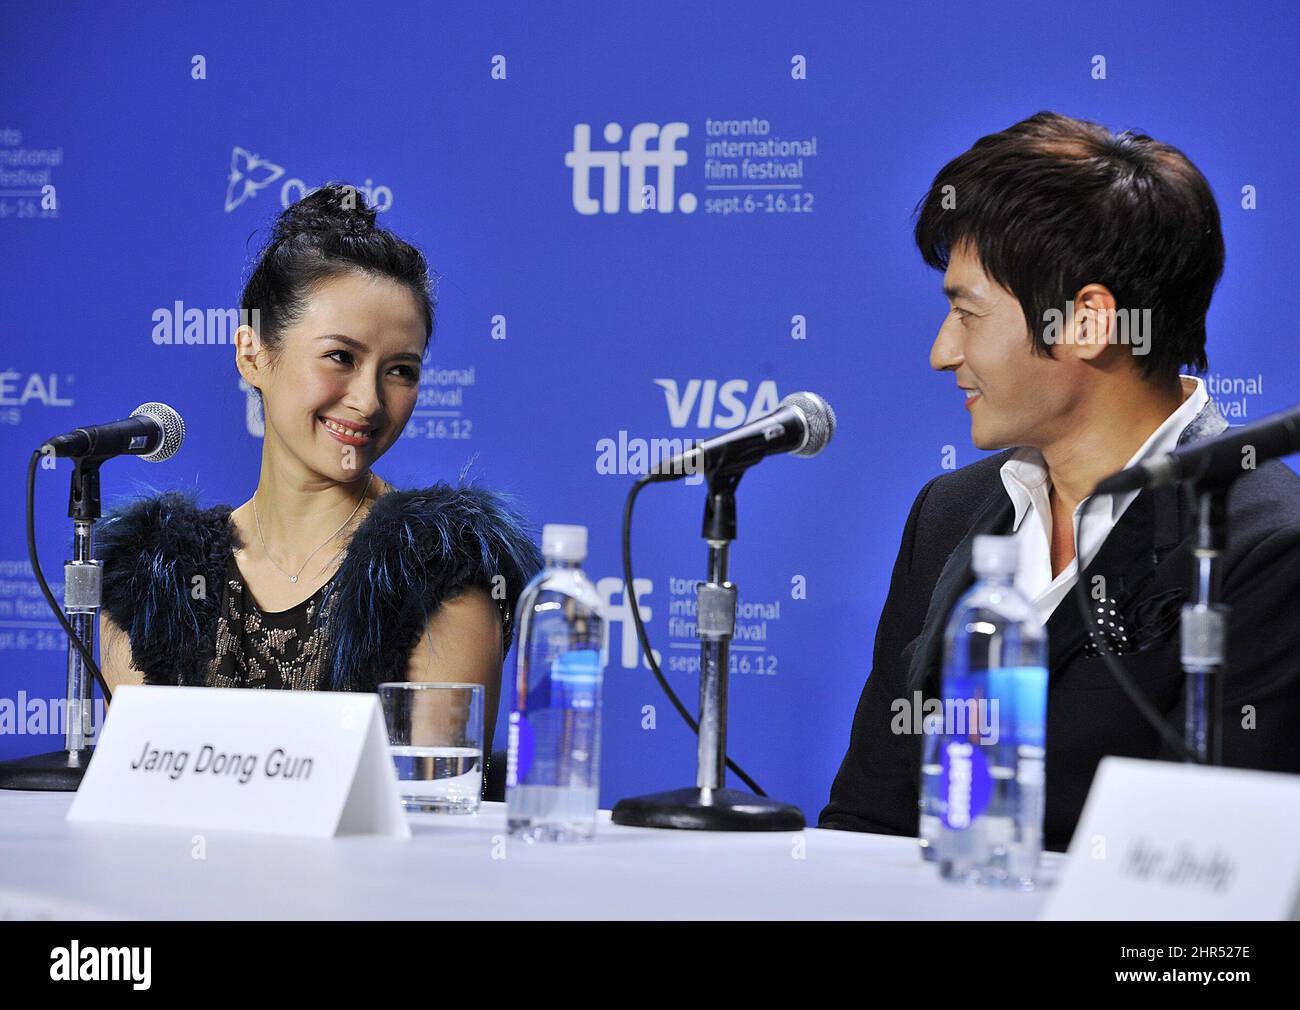 Korean actor Jang Dong-gun, right, sits alongside Chinese actress Zhang Ziyi during the press conference for the film "Dangerous Liaisons" during the 2012 Toronto International Film Festival in Toronto on Monday, Sept. 10, 2012. (AP Photo/The Canadian Press, Aaron Vincent Elkaim) Stock Photo